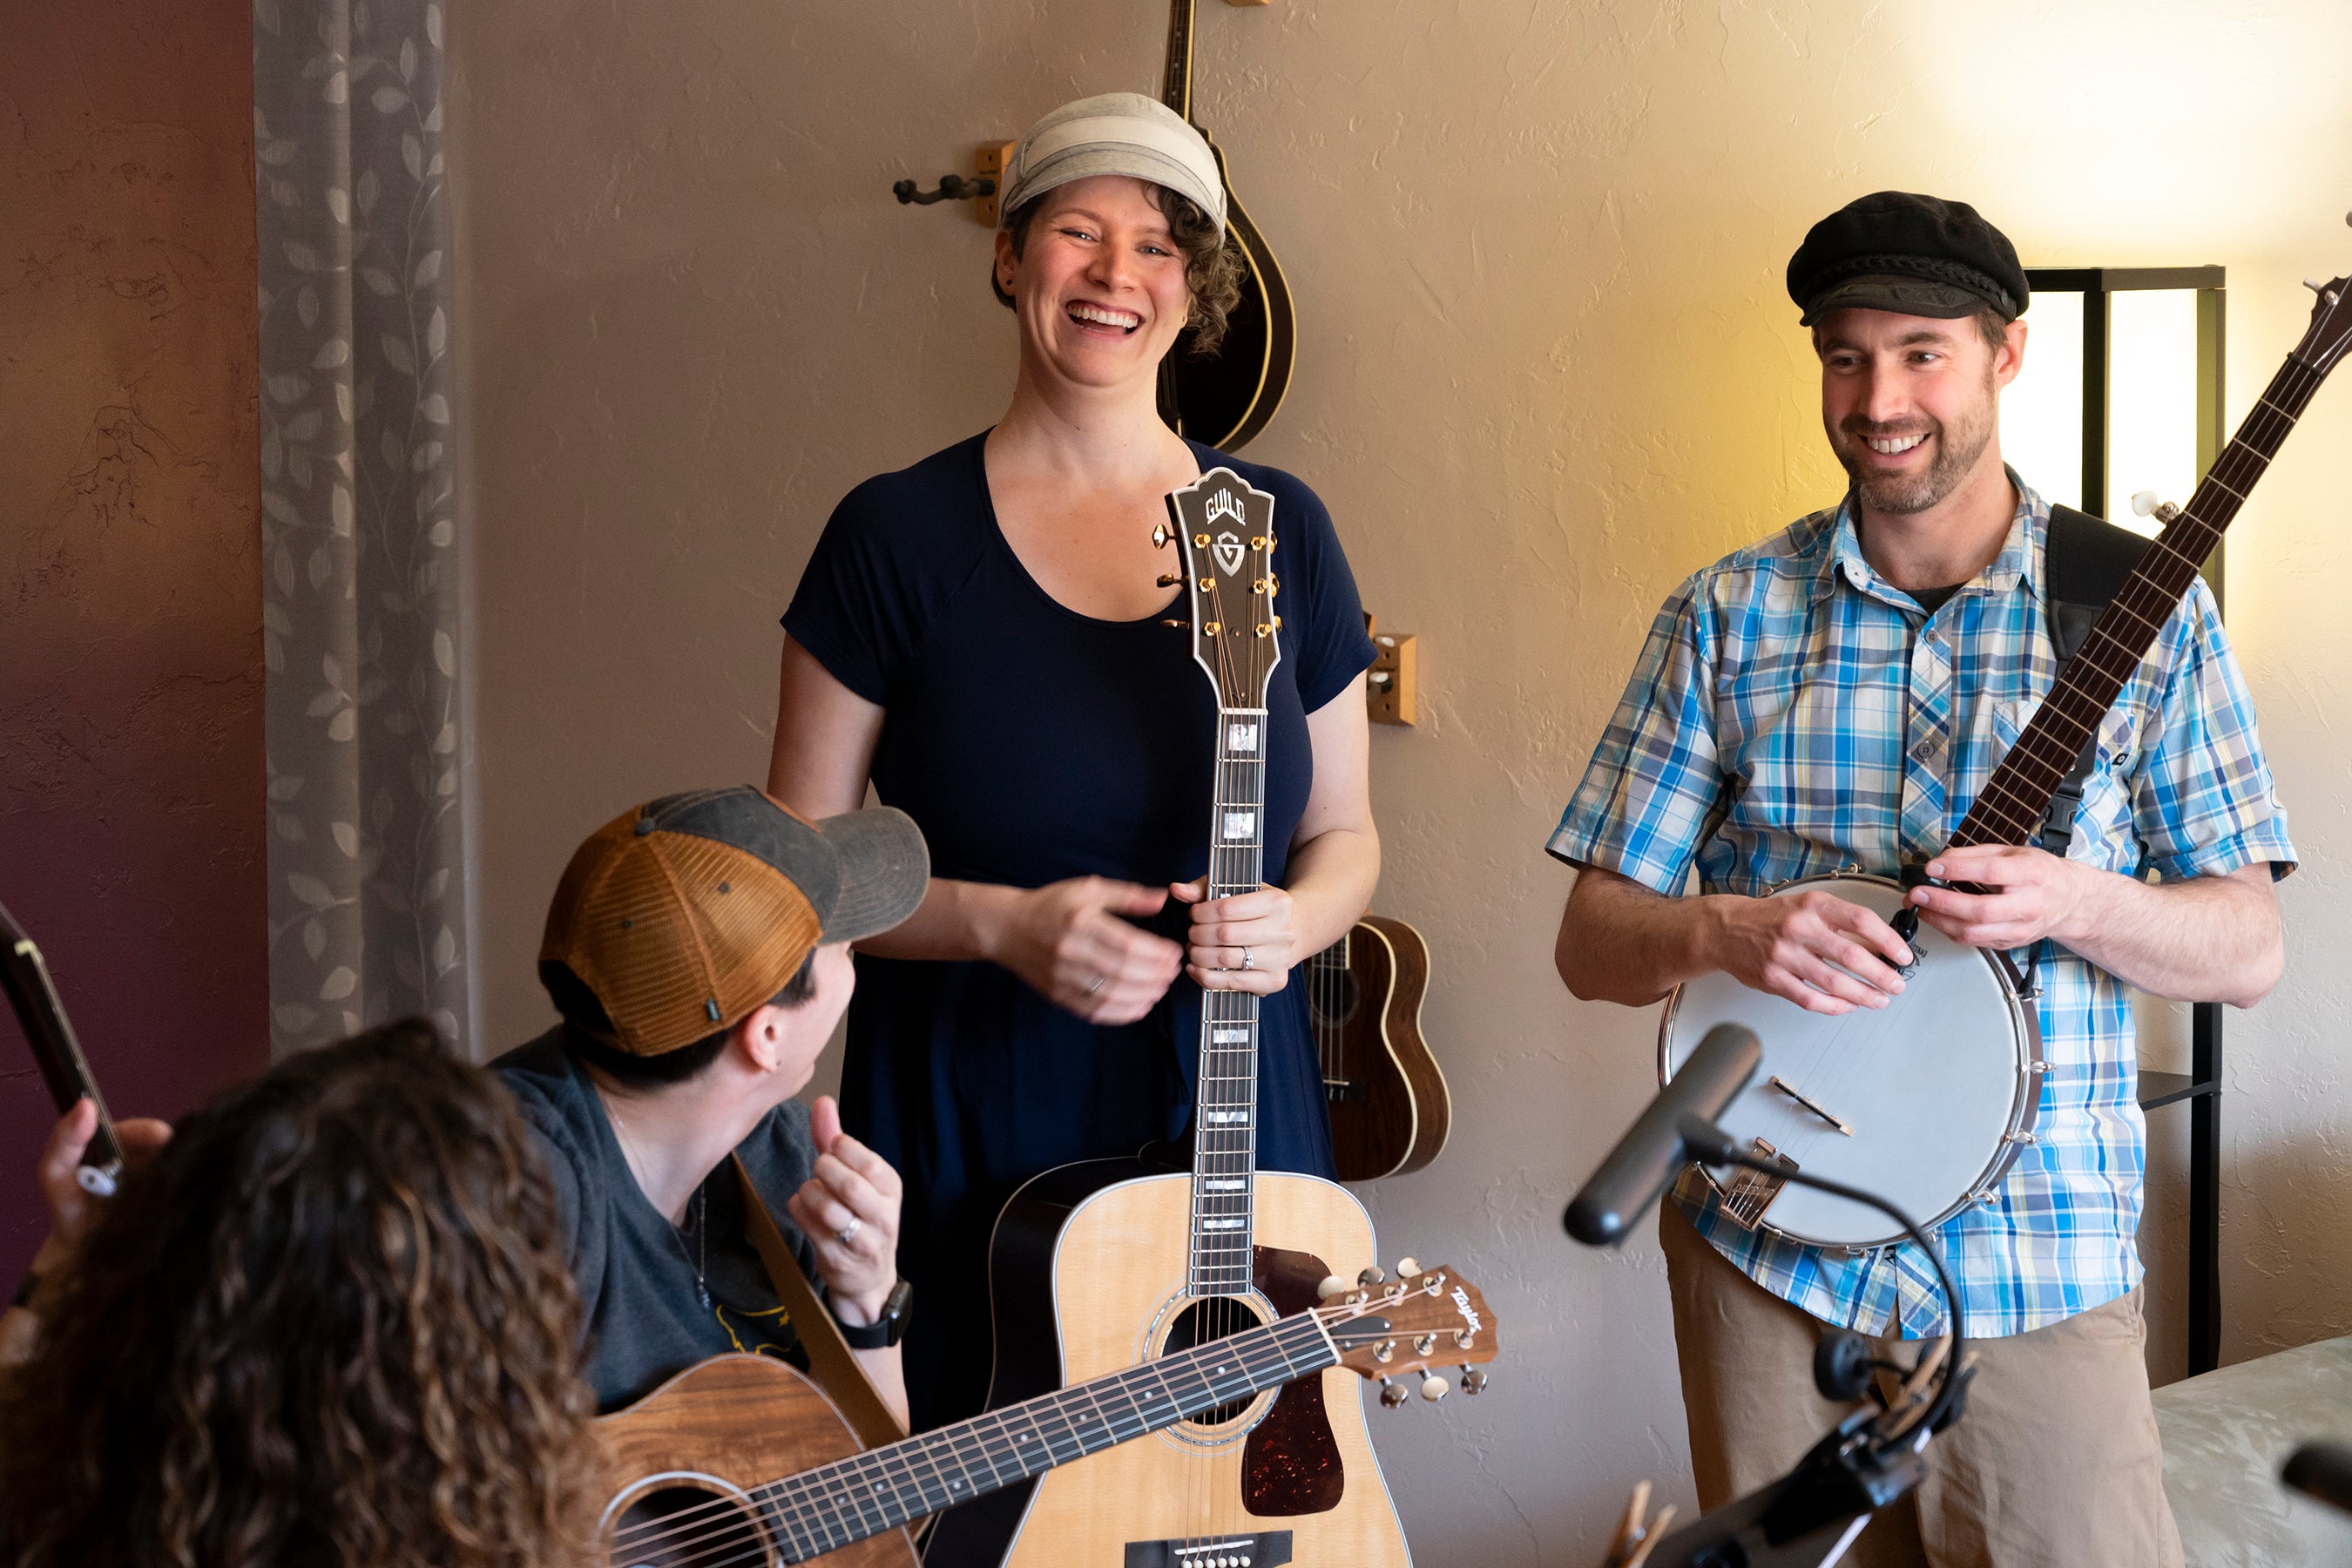 People smiling and laughing while holding their instruments